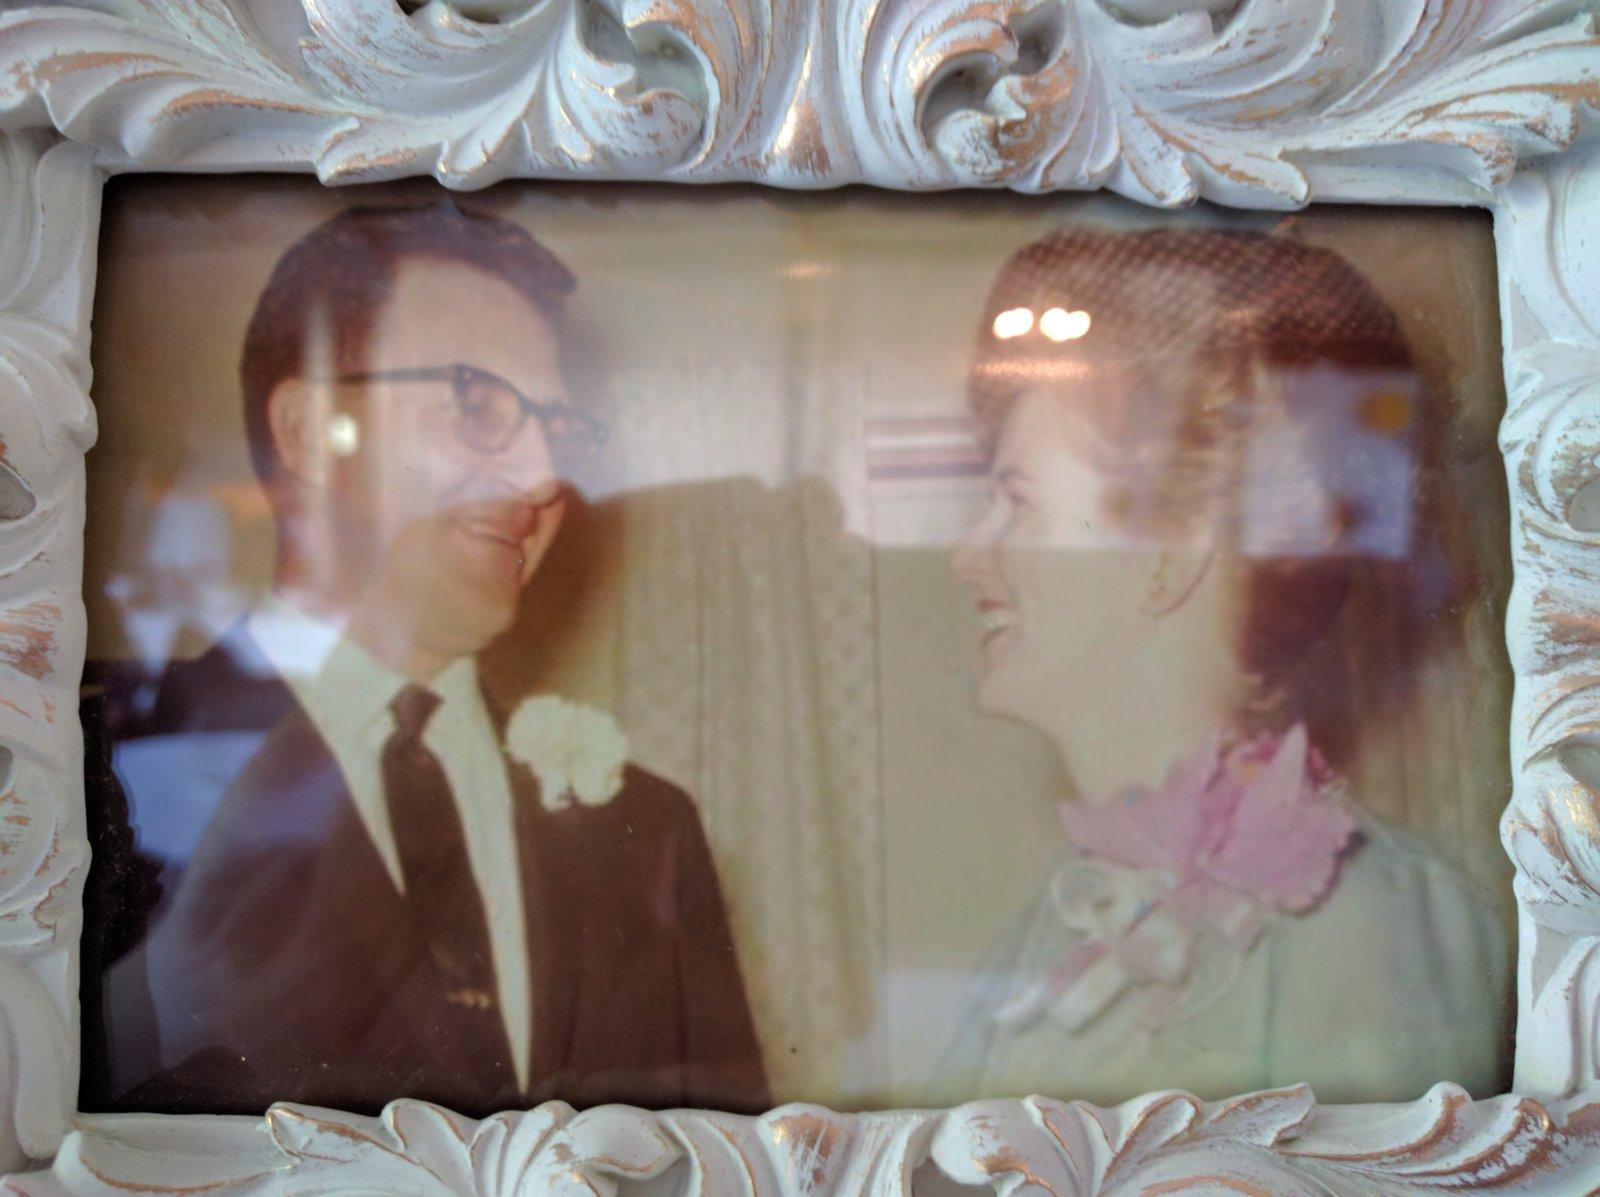 Mom and Dad's wedding photo. That red hair!